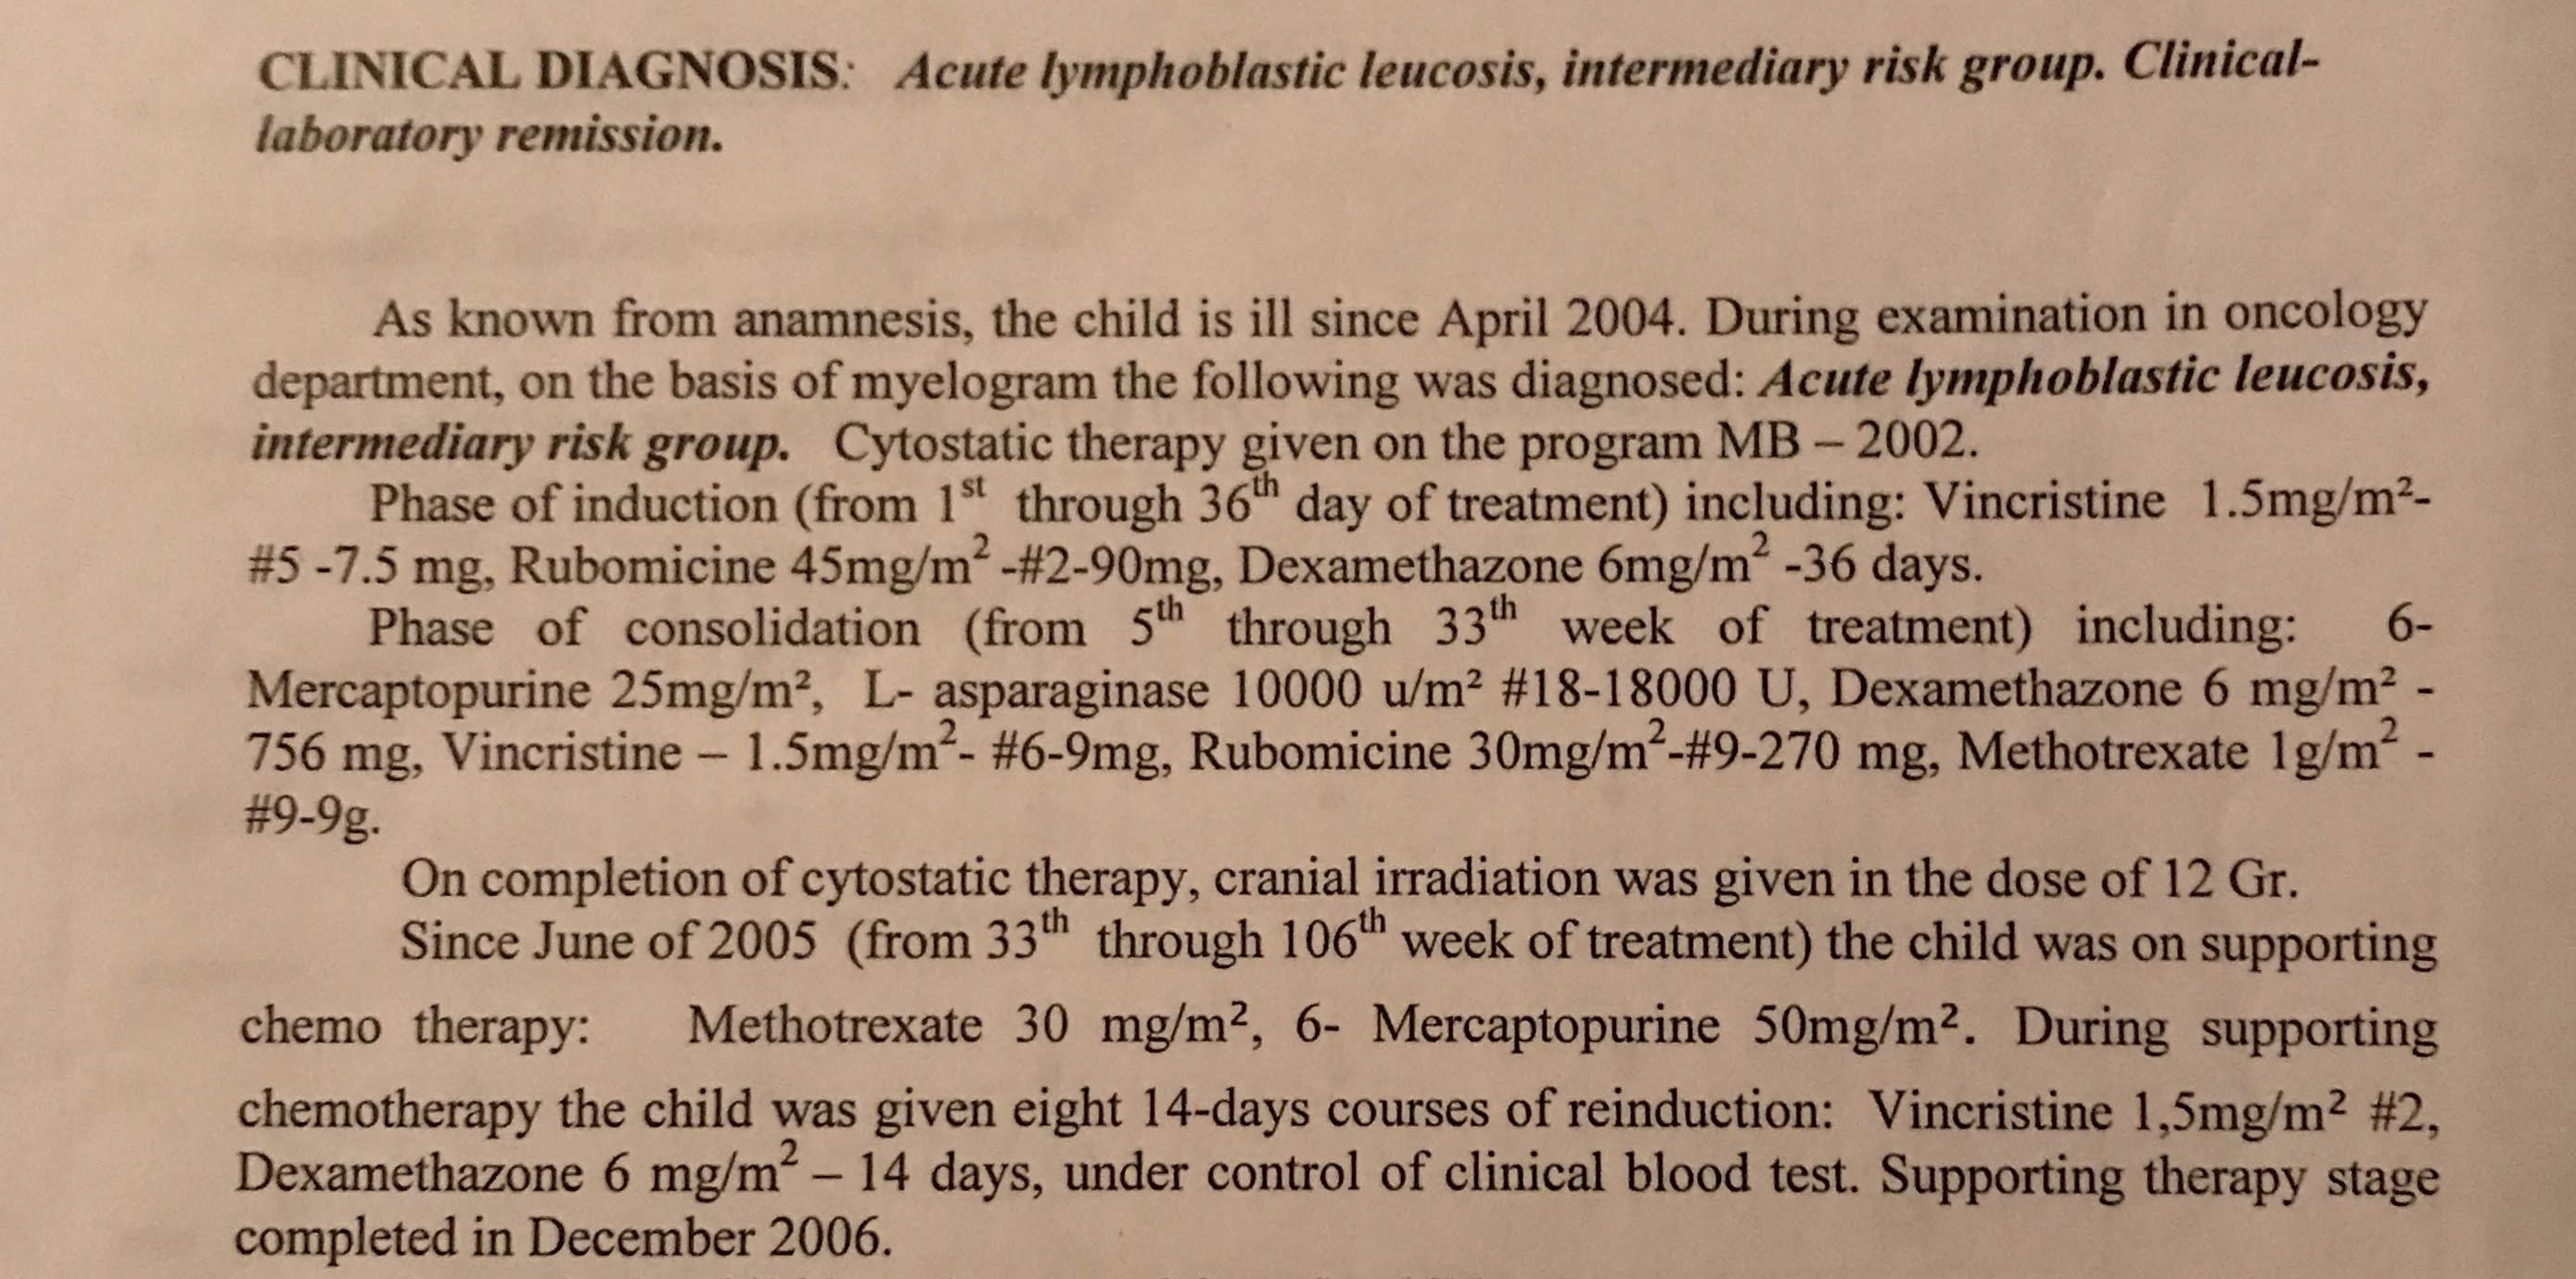 This is a translation of a medical record Masha has from the hospital where she was treated for her cancer. The record describes Masha's diagnosis and treatment protocol.